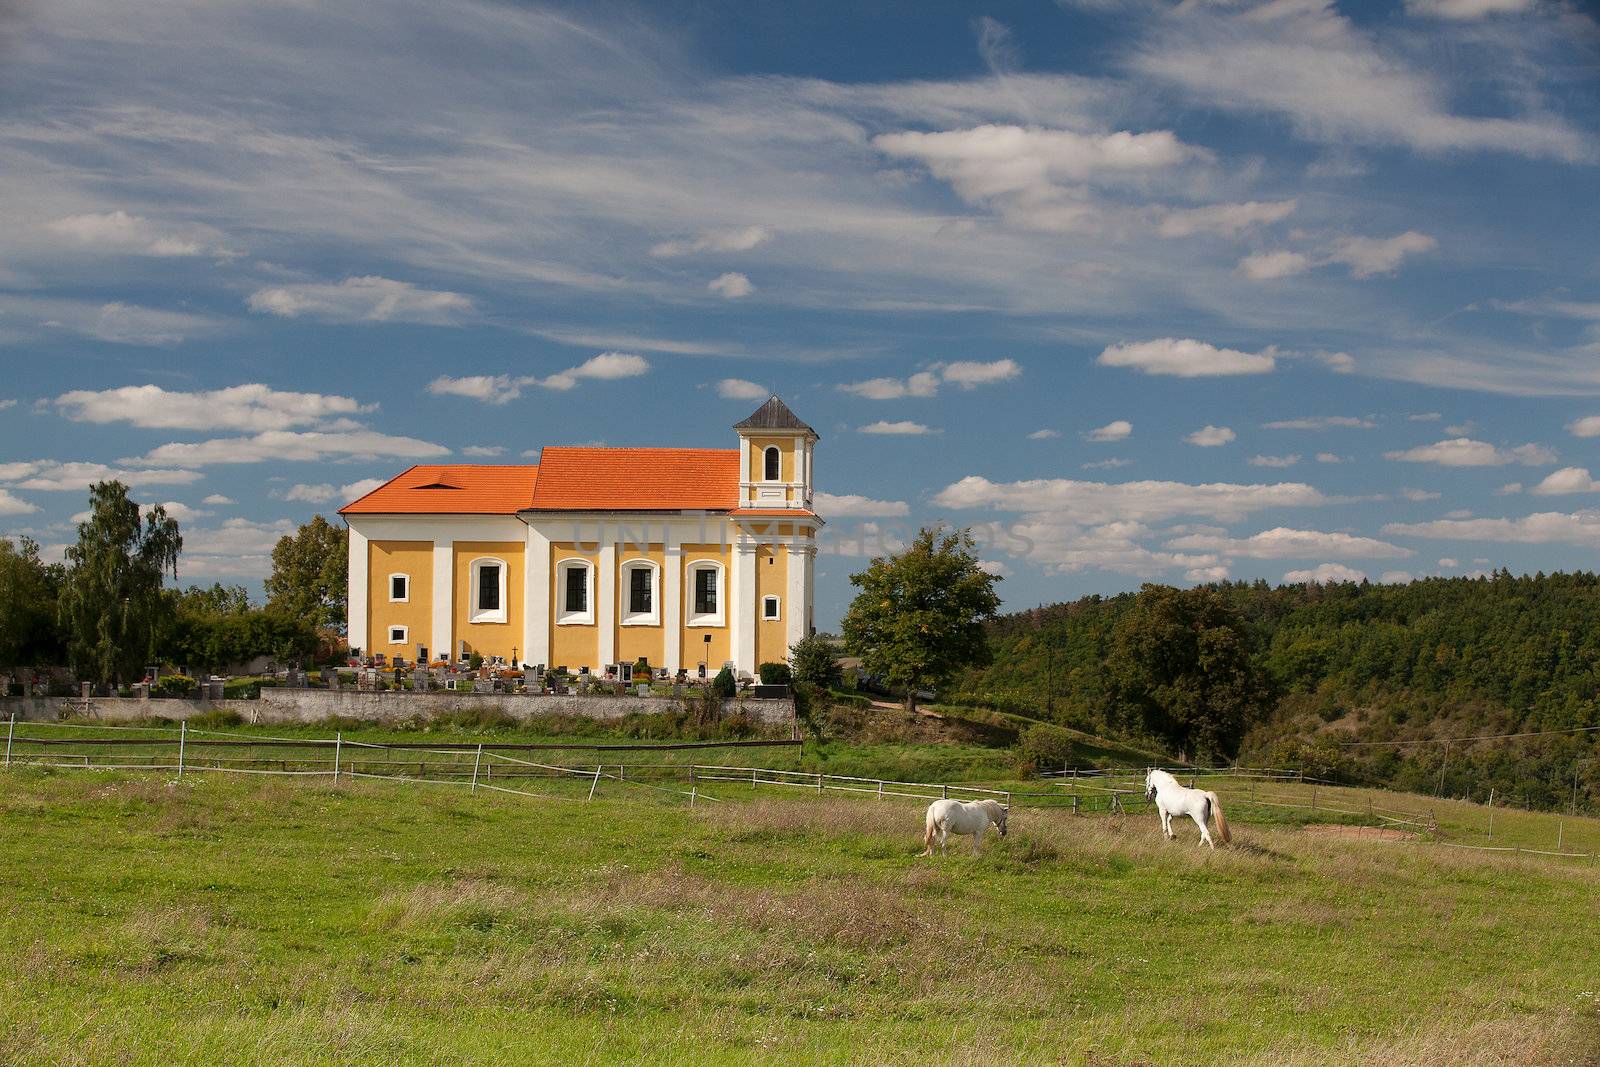 White horses on the pasture near the church